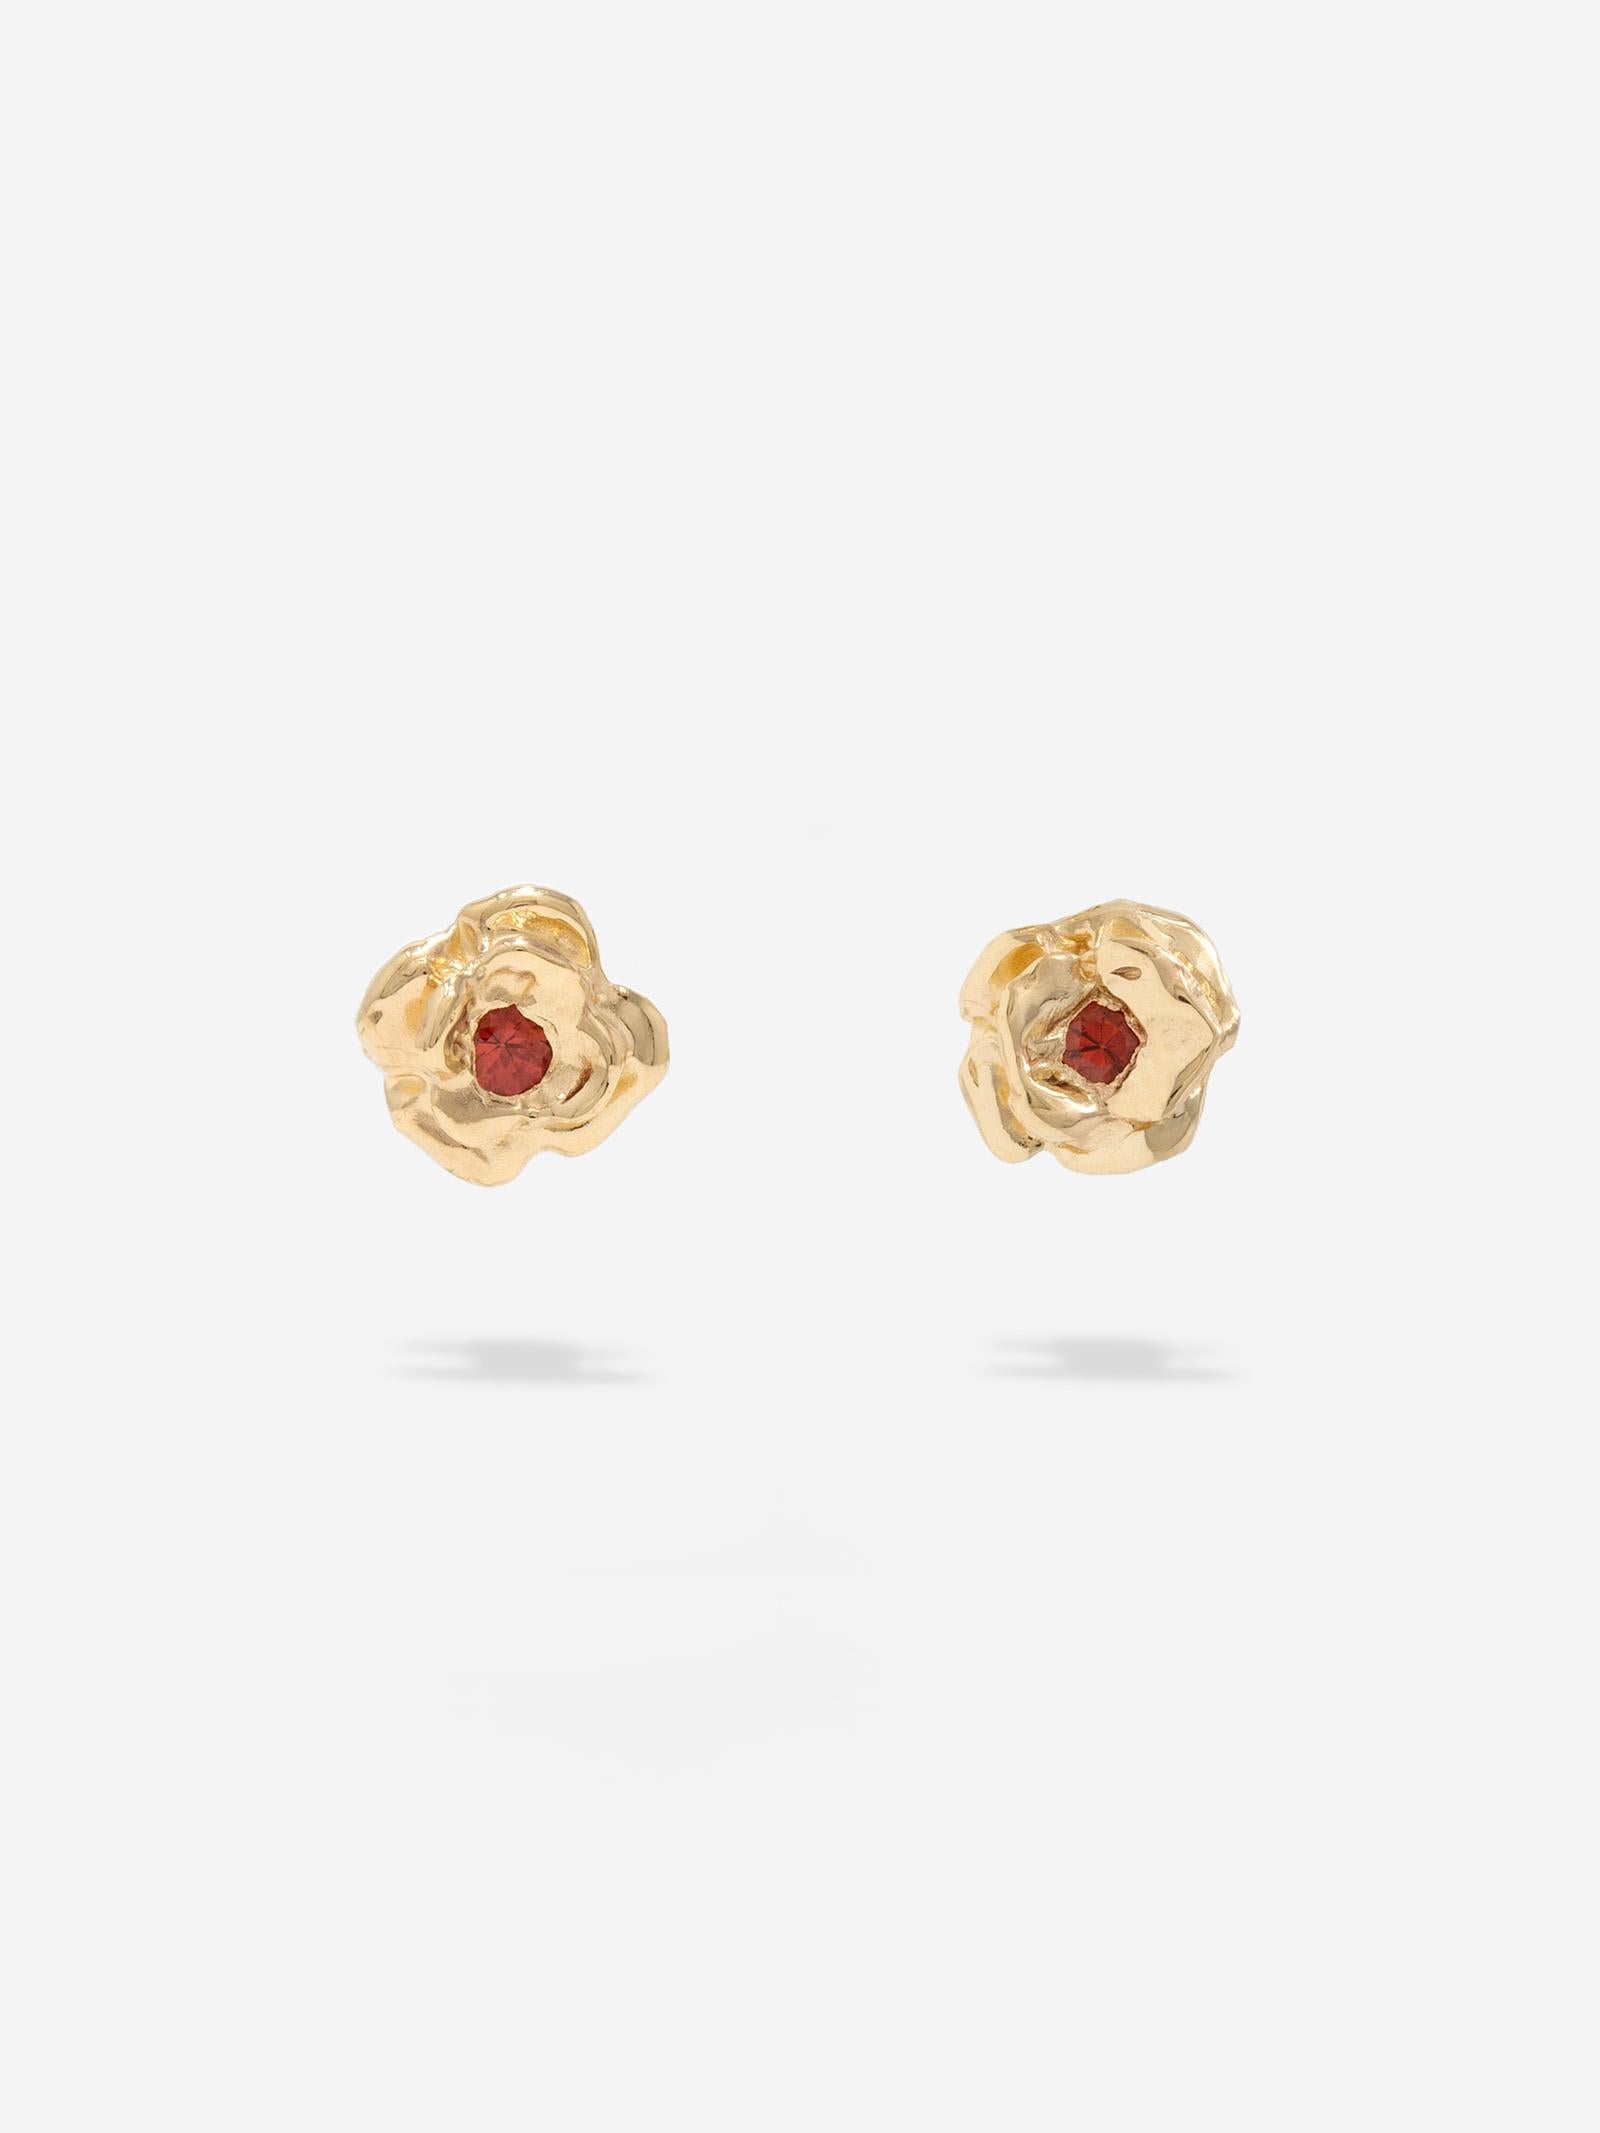 CAPTIVE - One-of-a-kind hand carved earrings made in solid 10K gold and set with 2mm red sapphires.